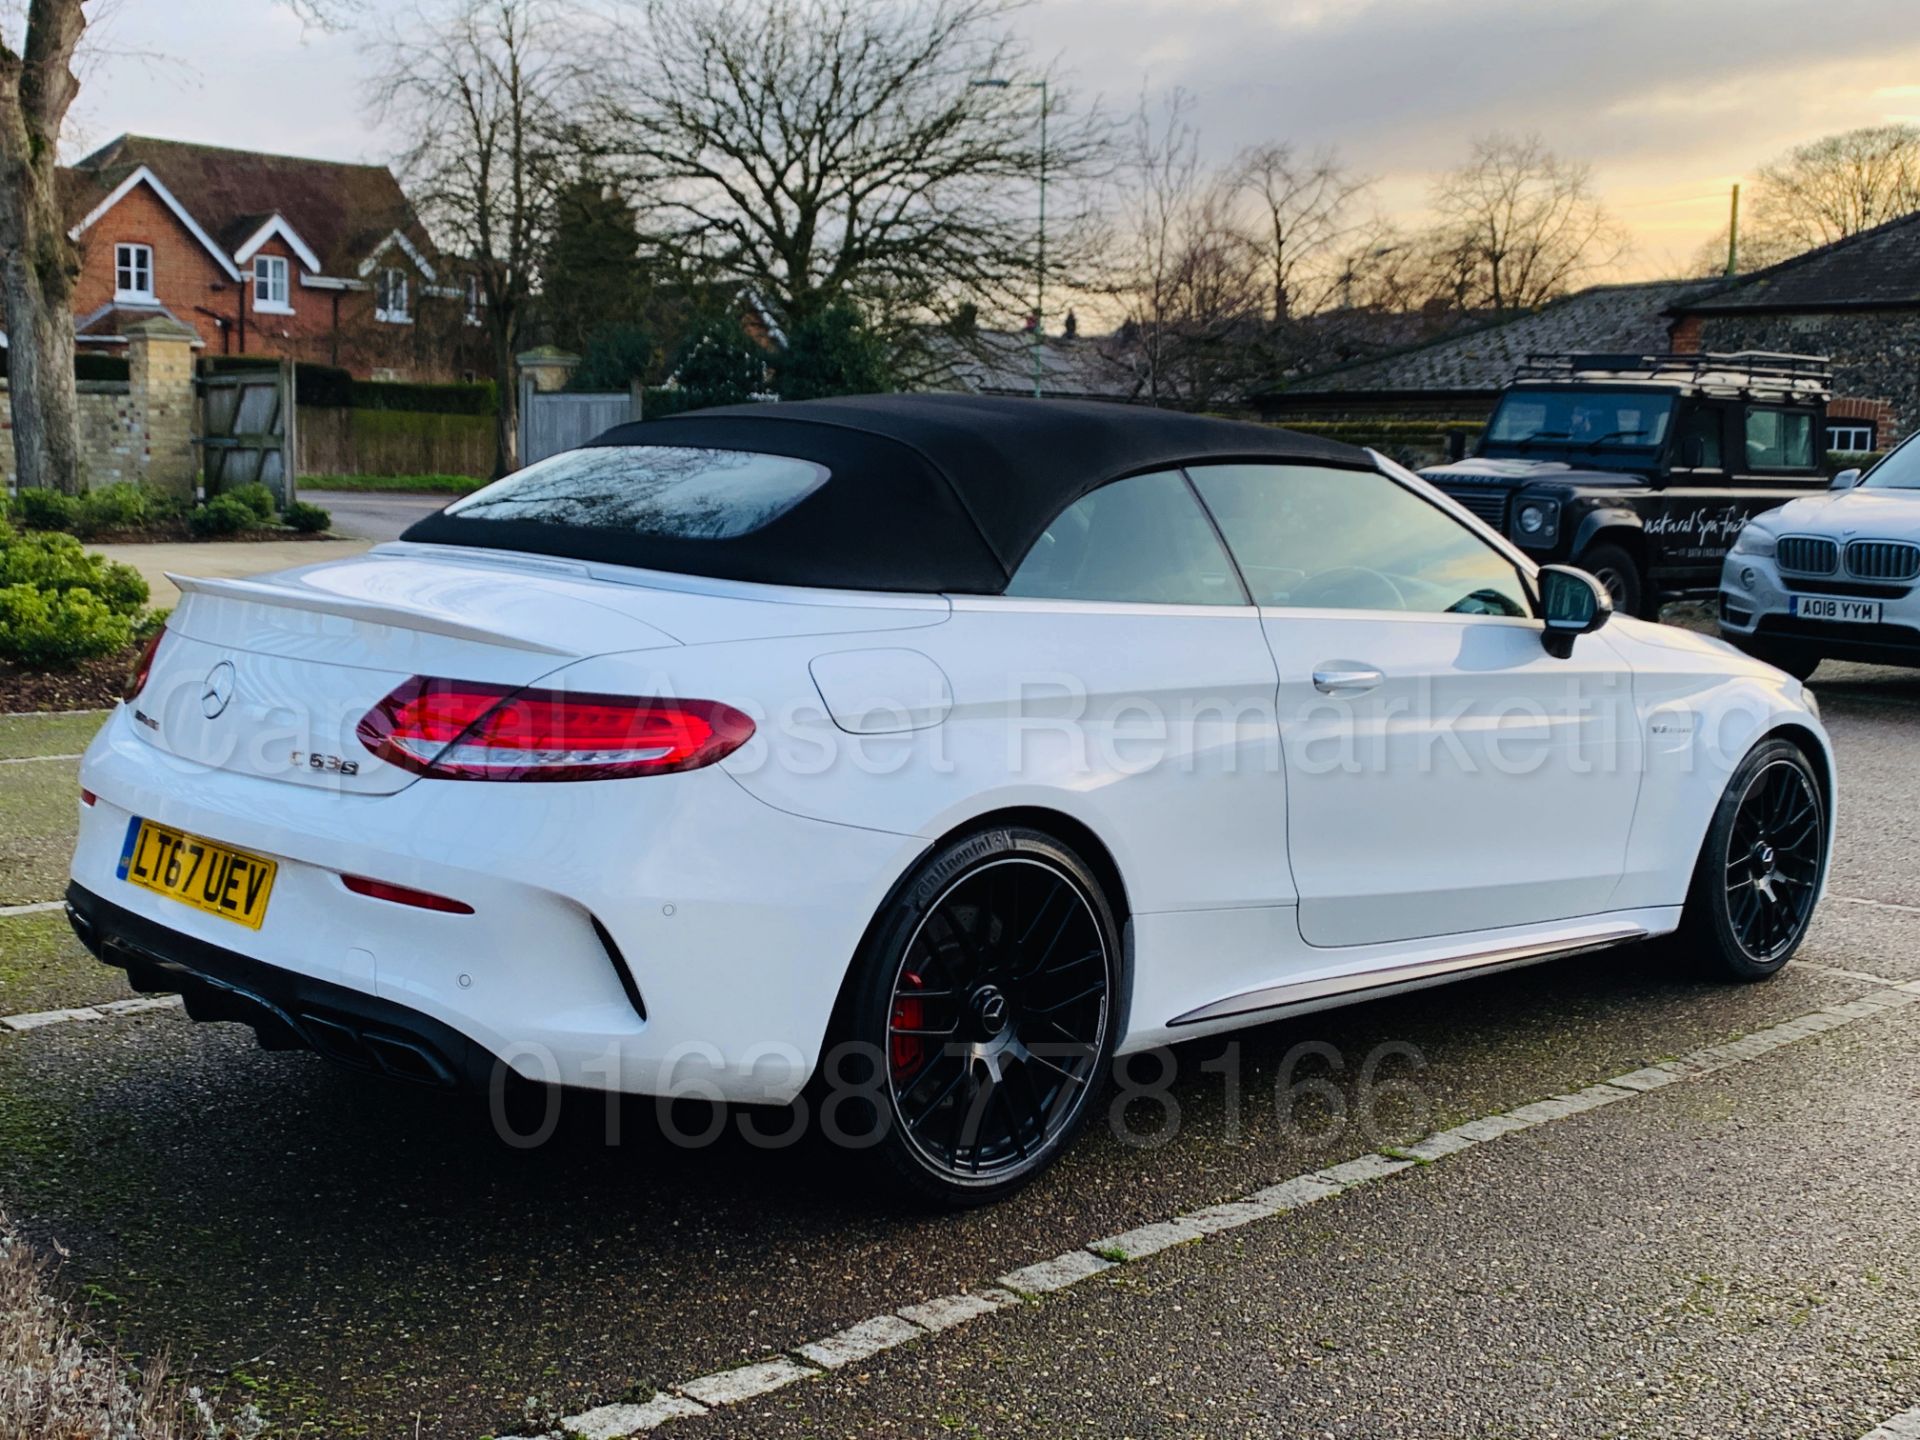 (On Sale) MERCEDES-BENZ AMG C63-S *CABRIOLET* (67 REG) '4.0 BI-TURBO -510 BHP - AUTO' *FULLY LOADED* - Image 24 of 79